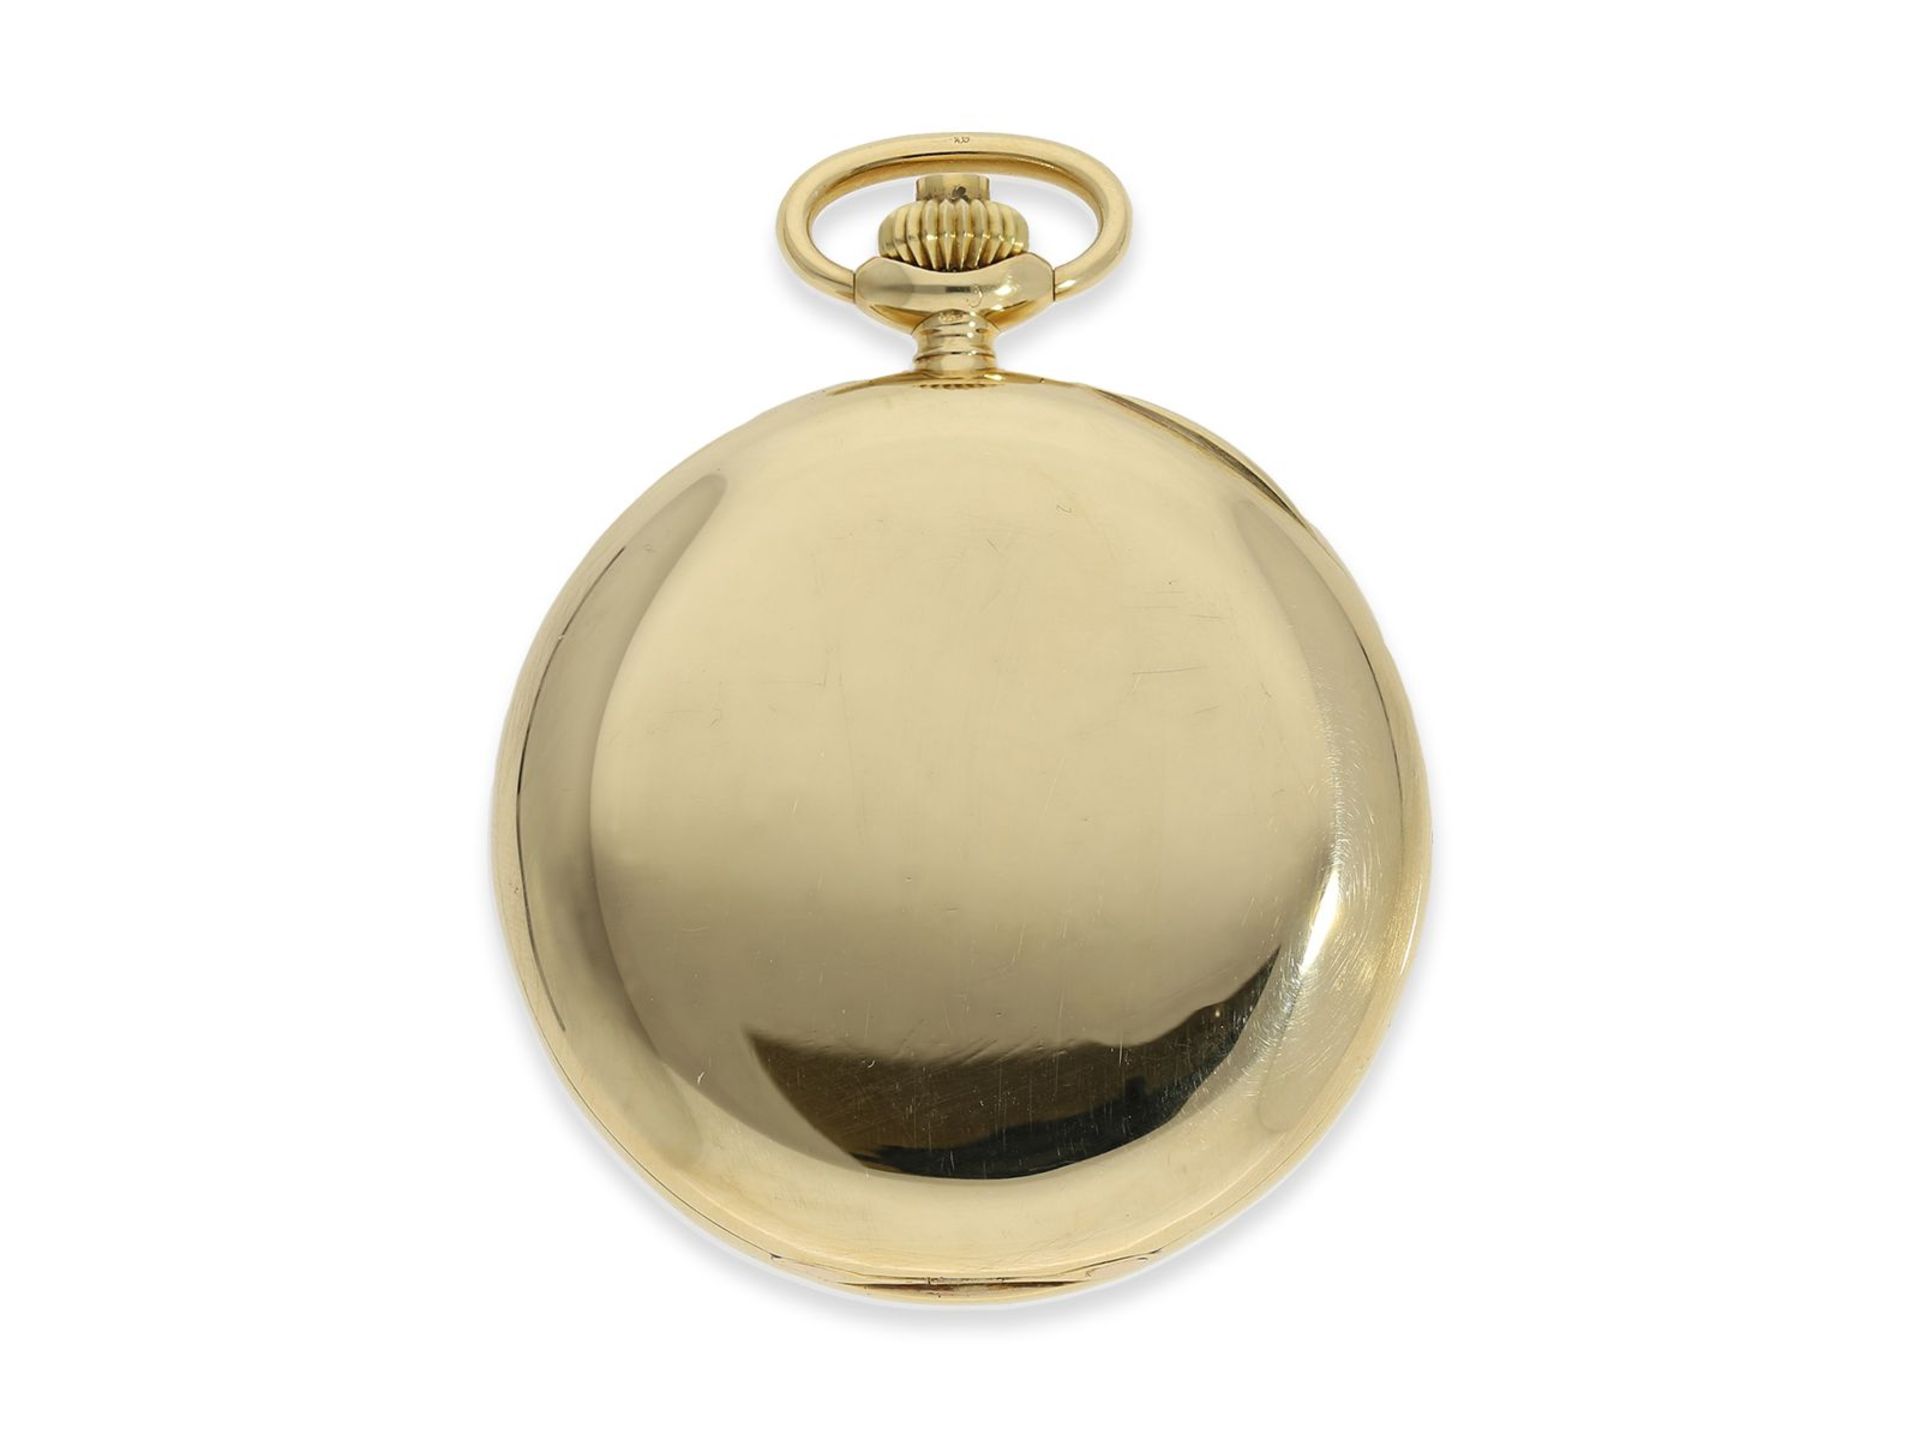 Pocket watch: fine 18K gold doctor's chronograph, Longines, ca. 1915, Ankerchronometer quality - Image 6 of 6